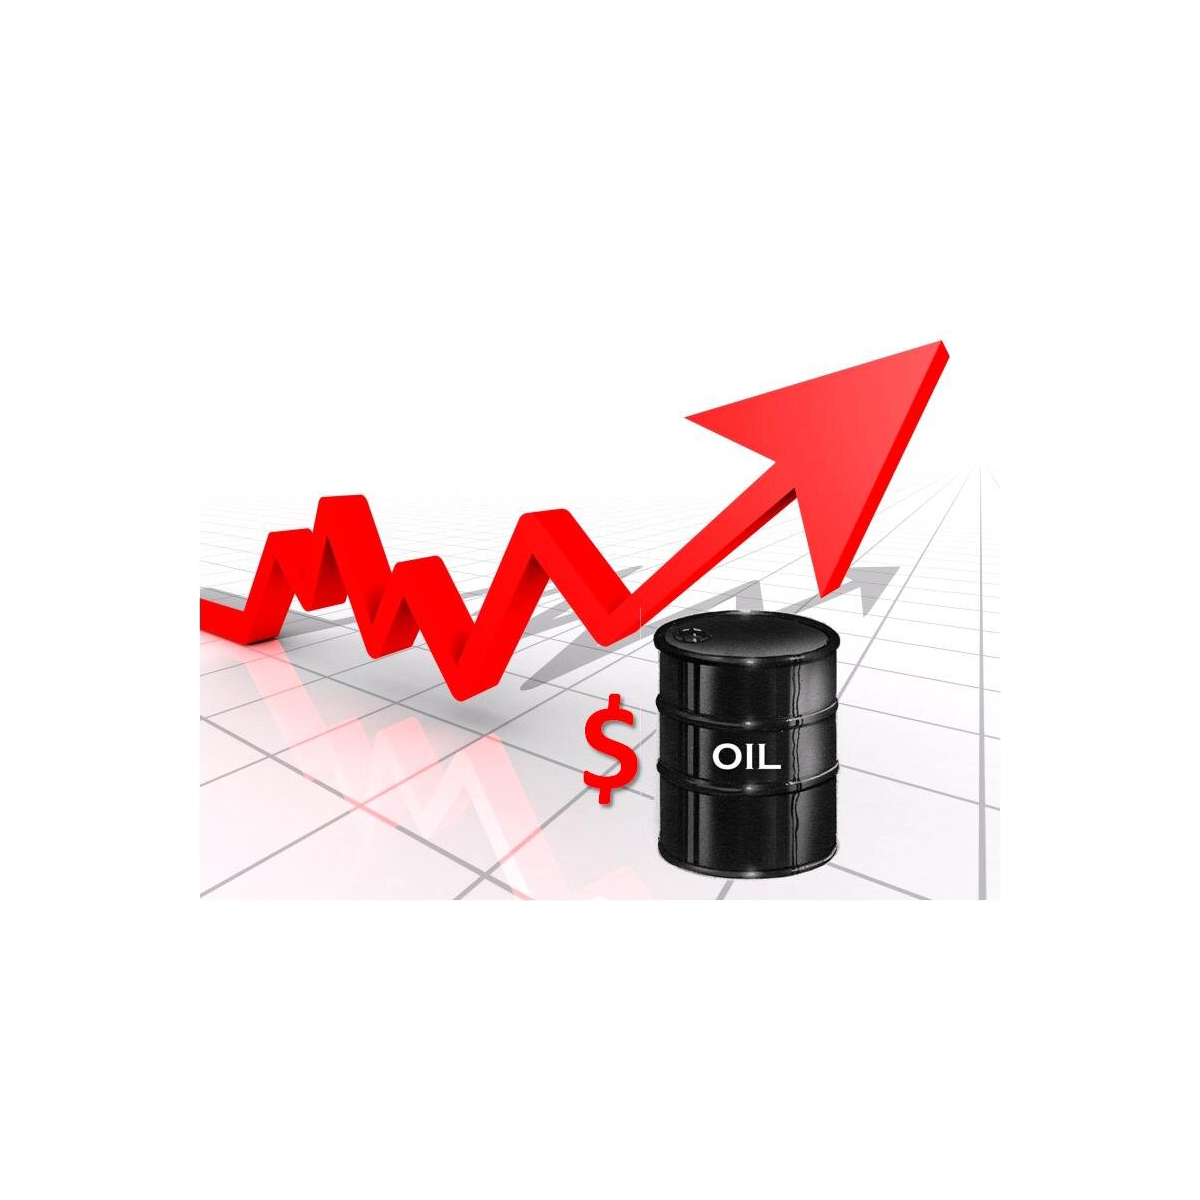 Oil Prices Increased